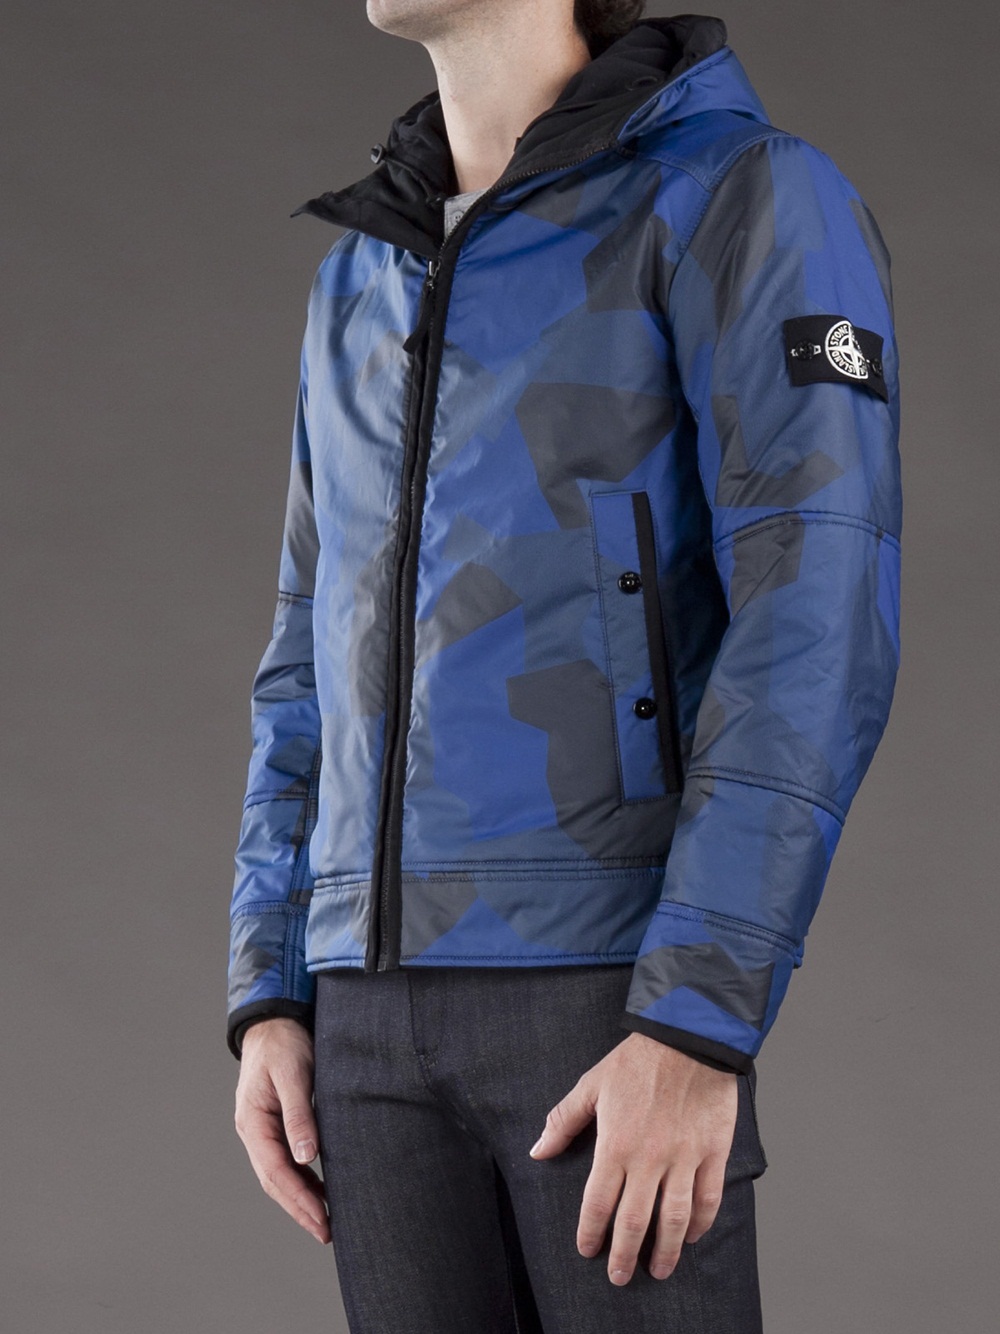 Stone Island Camo Reflective Jacket in Blue for Men | Lyst